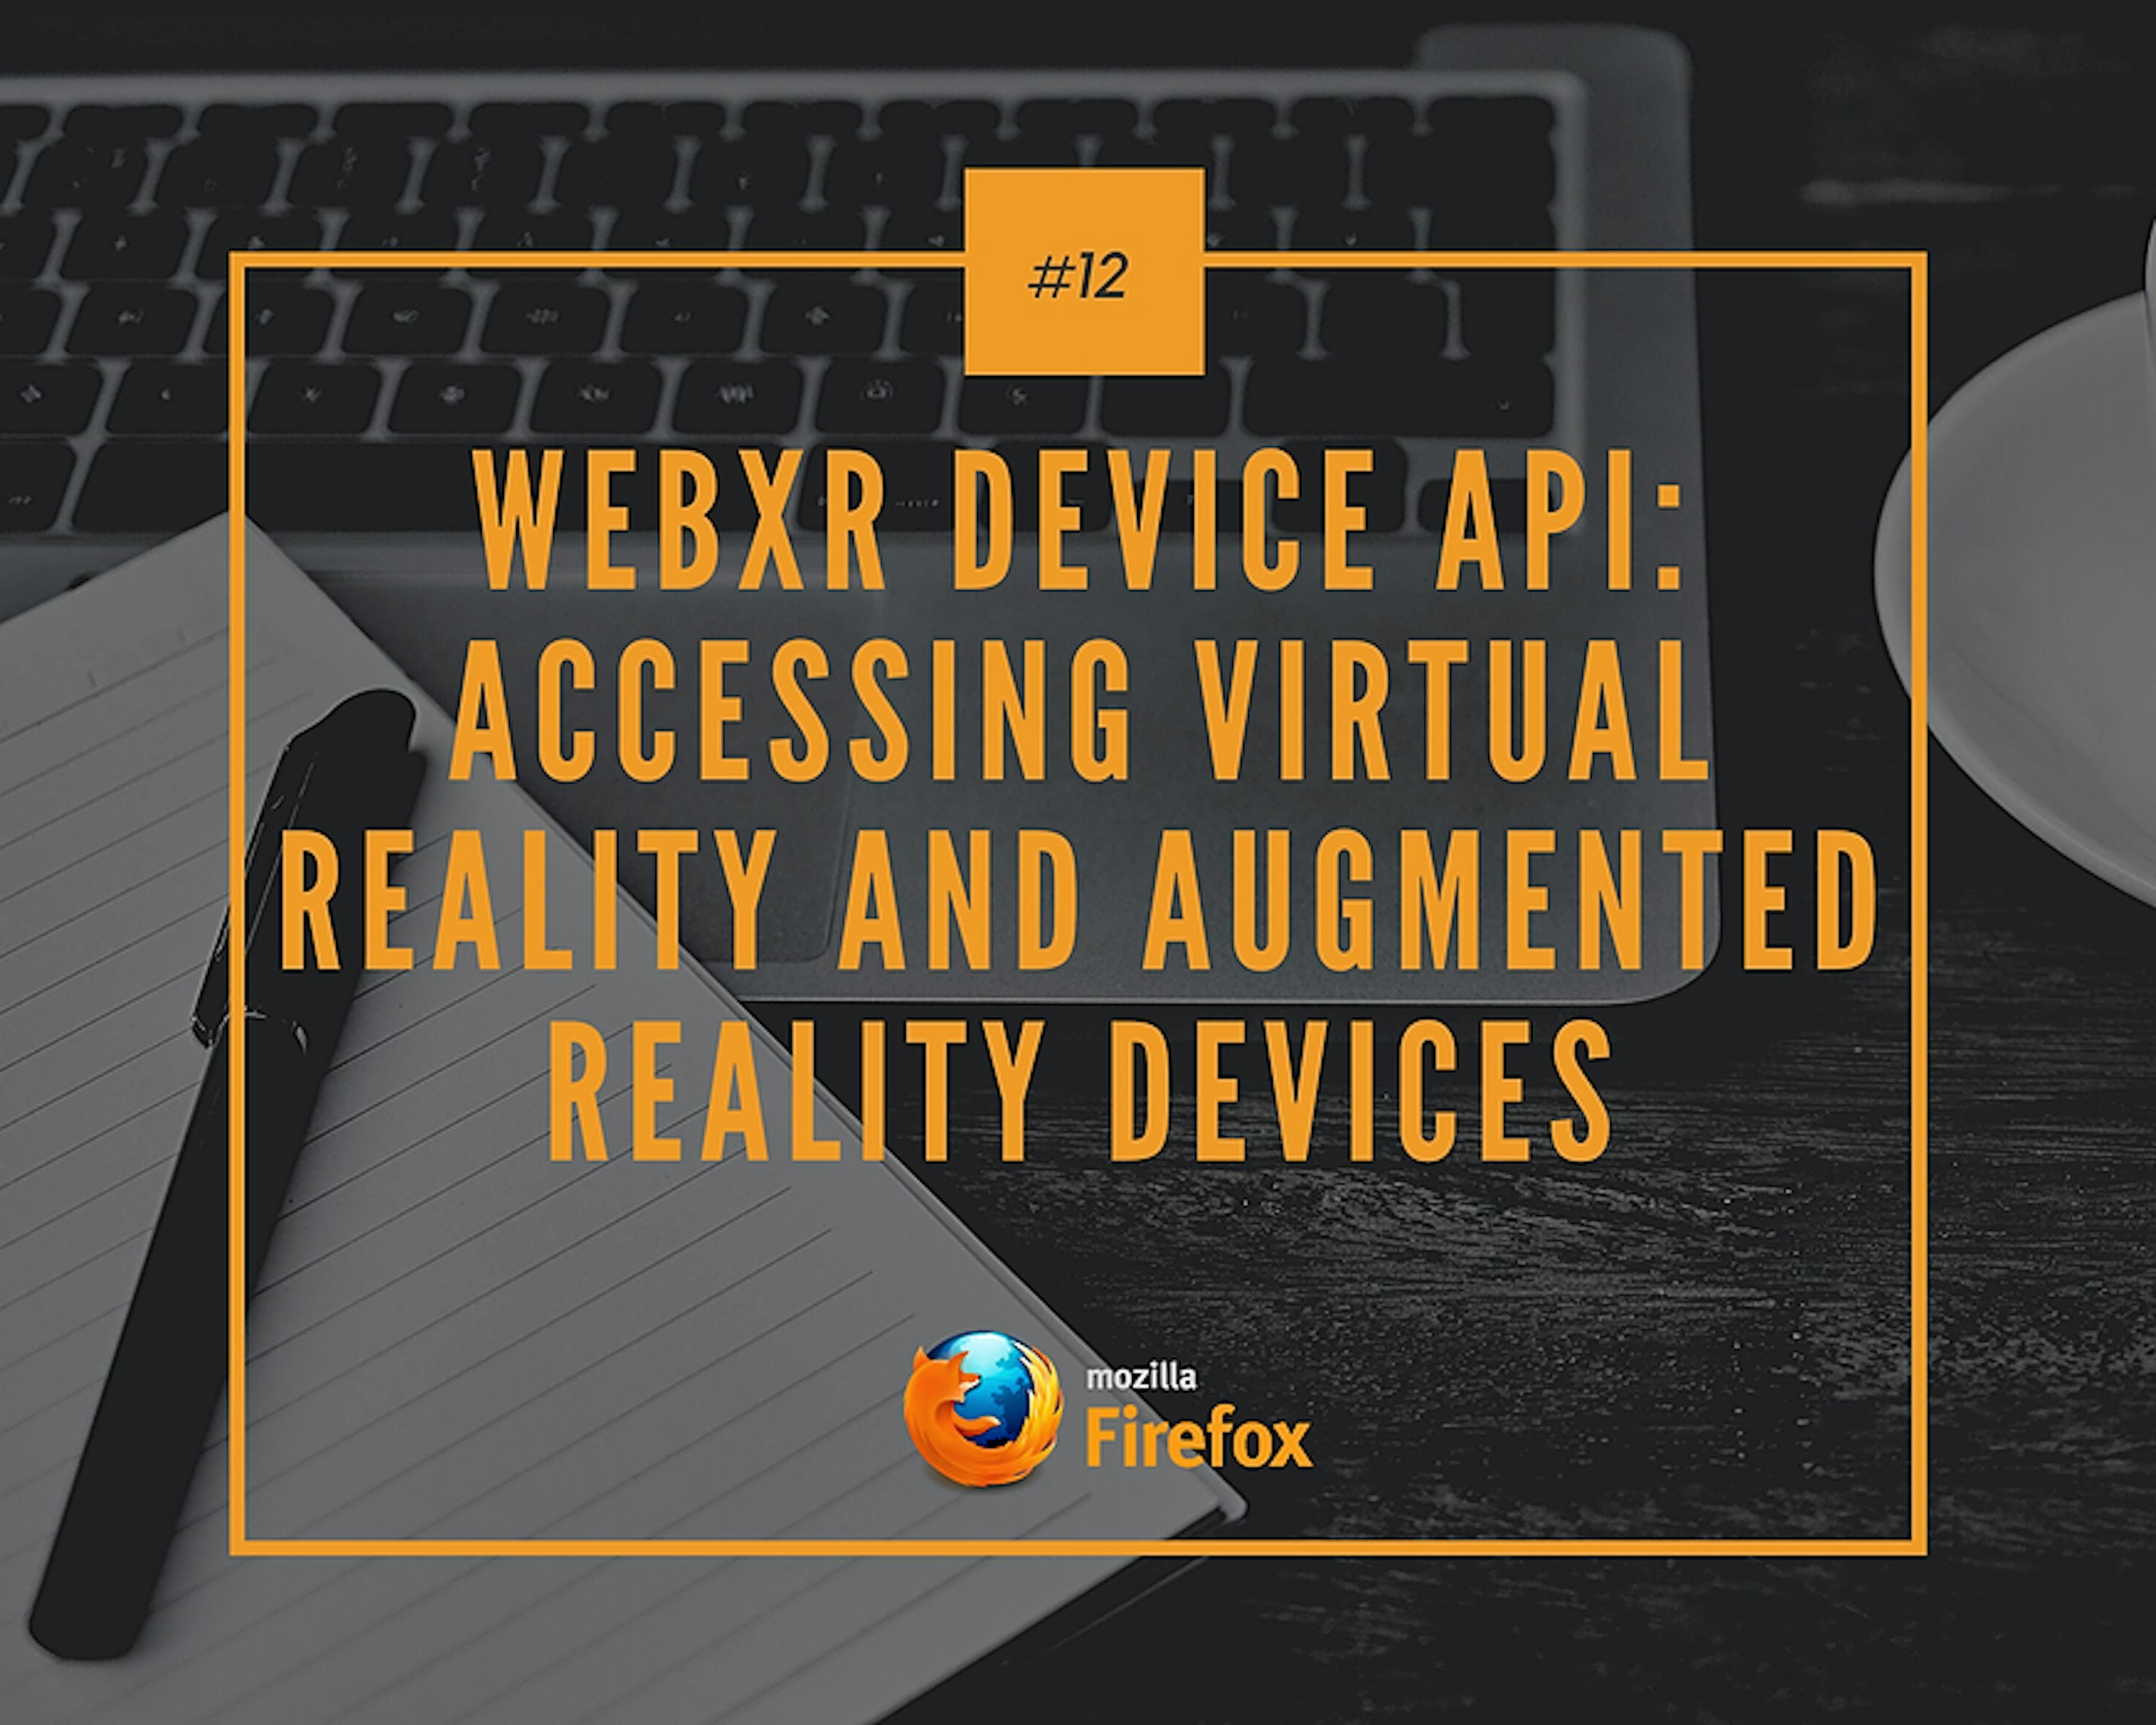 /webxr-device-api-accessing-virtual-reality-and-augmented-reality-devices-liv3y1f feature image